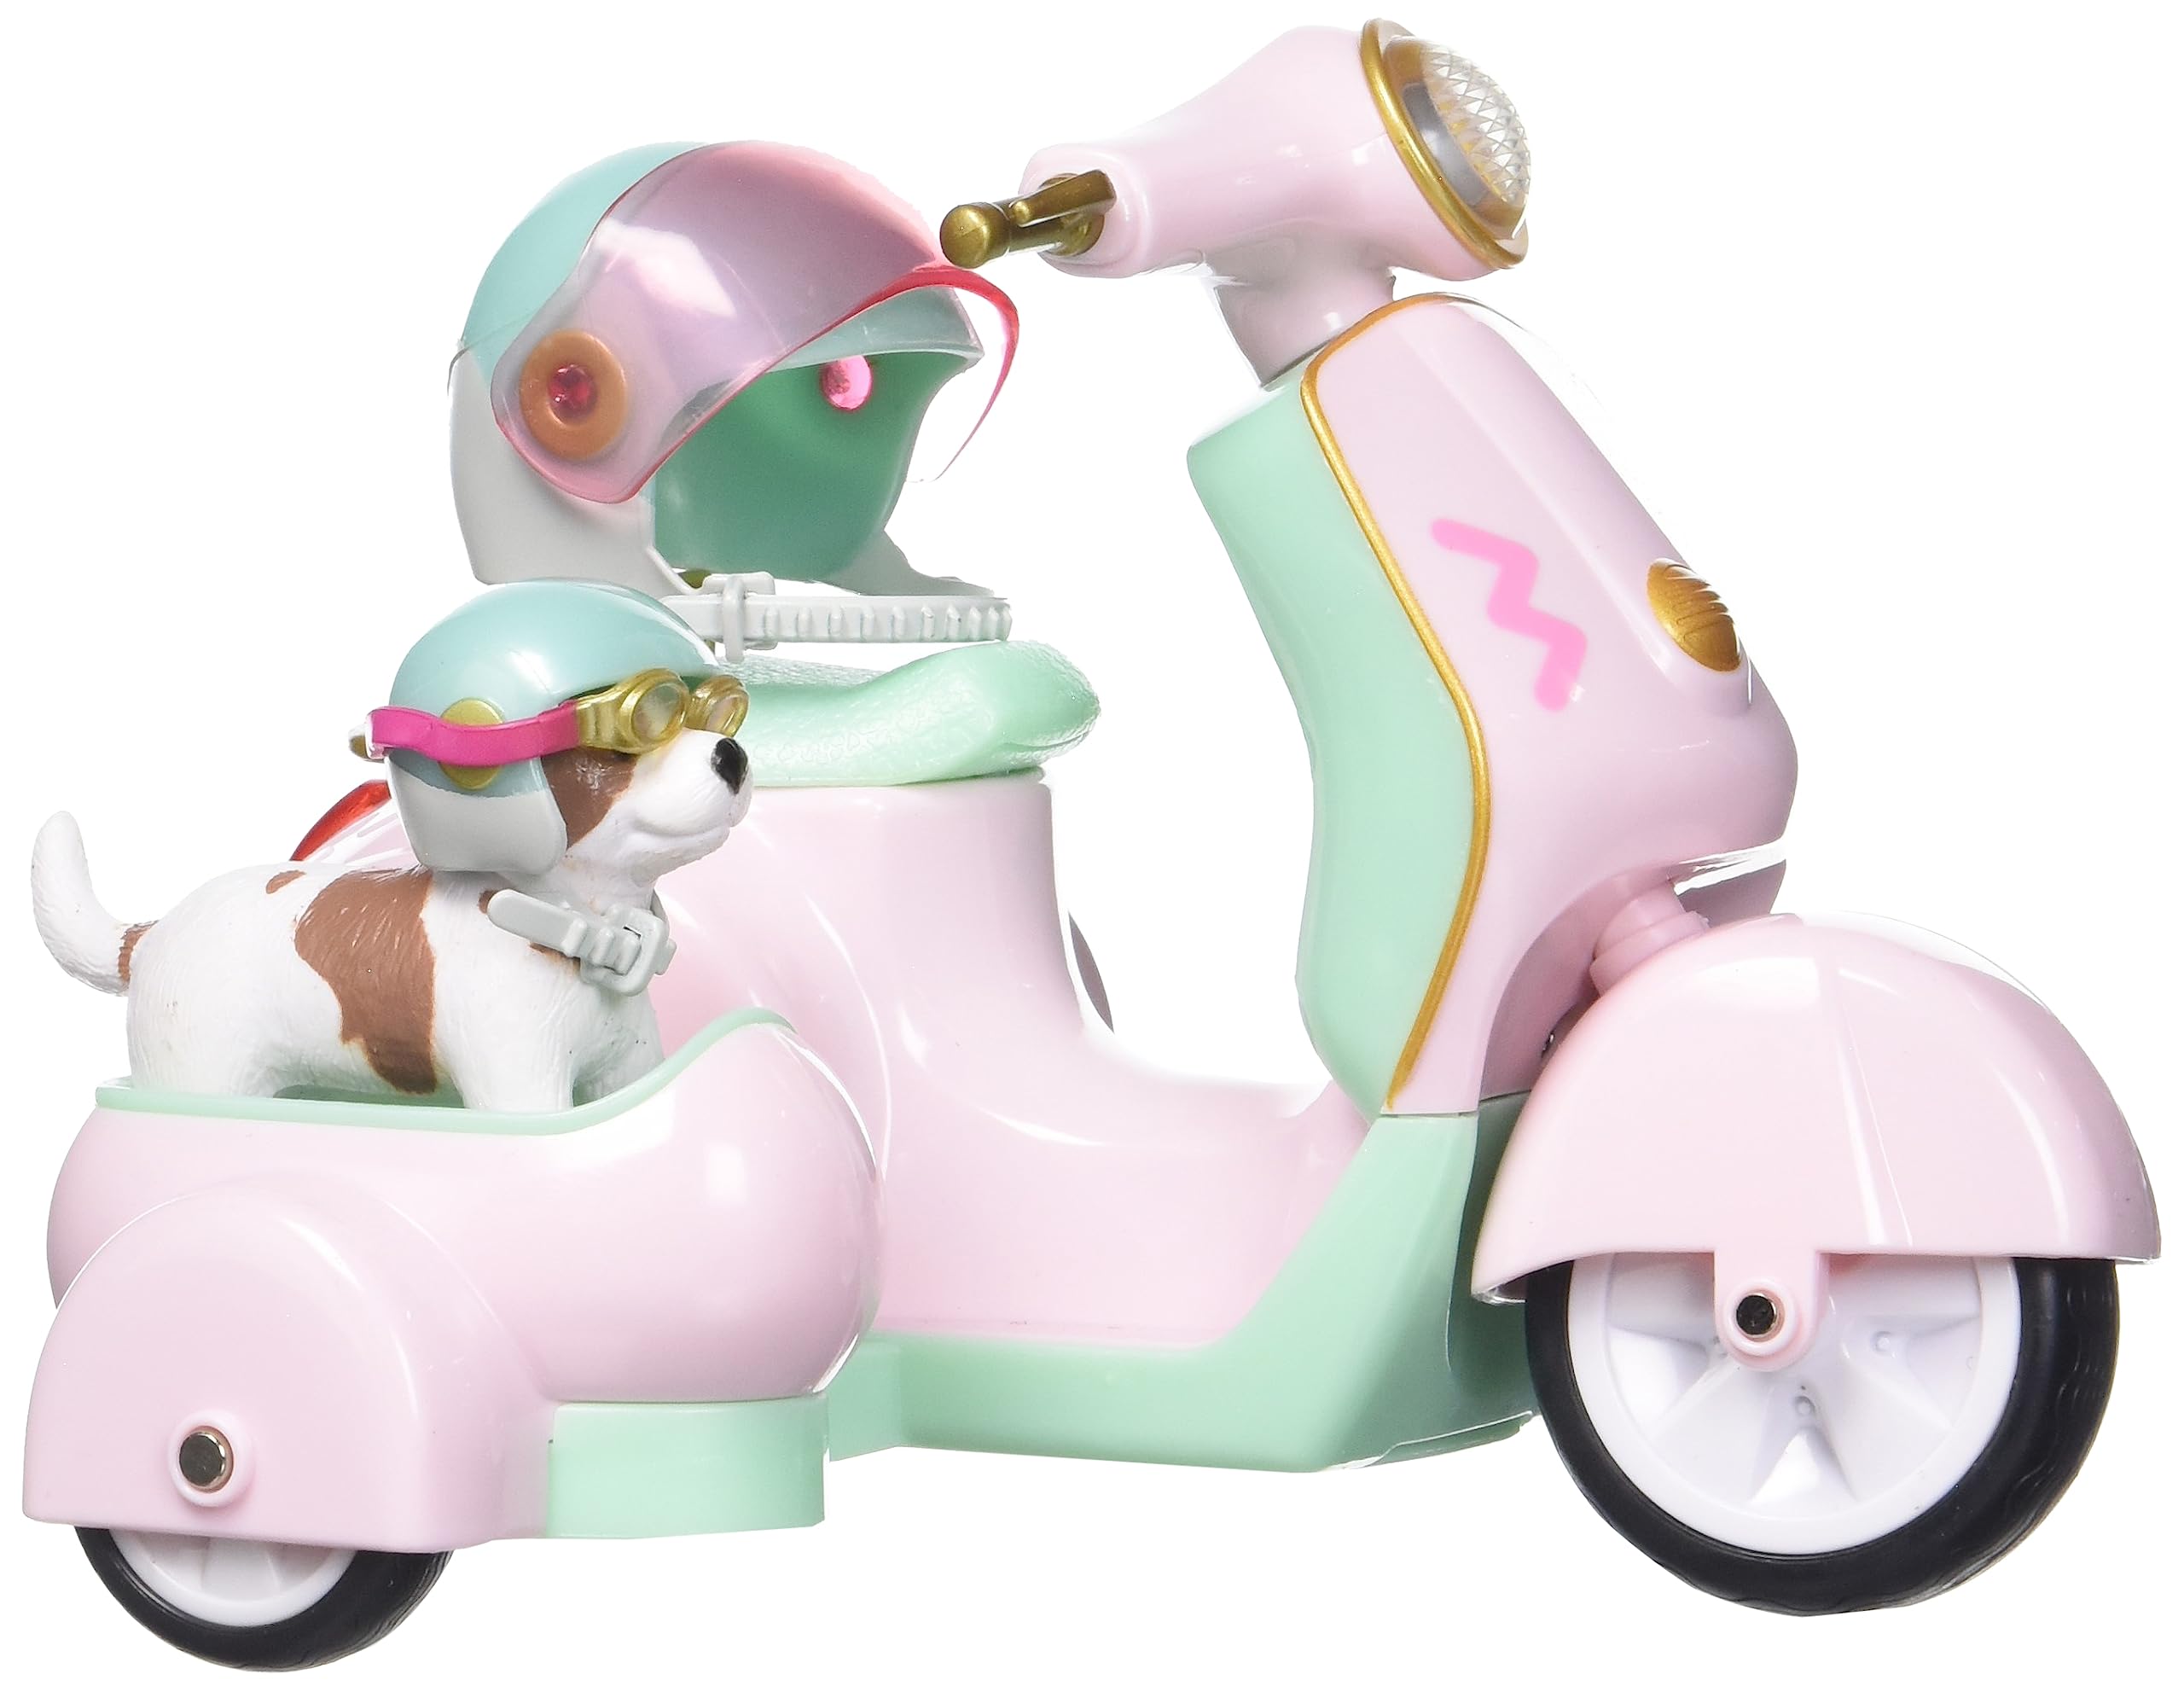 Lori Dolls – Toy Scooter for Mini Dolls – Vehicle with Accessories – Toy Dog with Helmet & Goggles – Working Lights & Sounds – Let’s Go for a Spin Scooter – 3 Years +